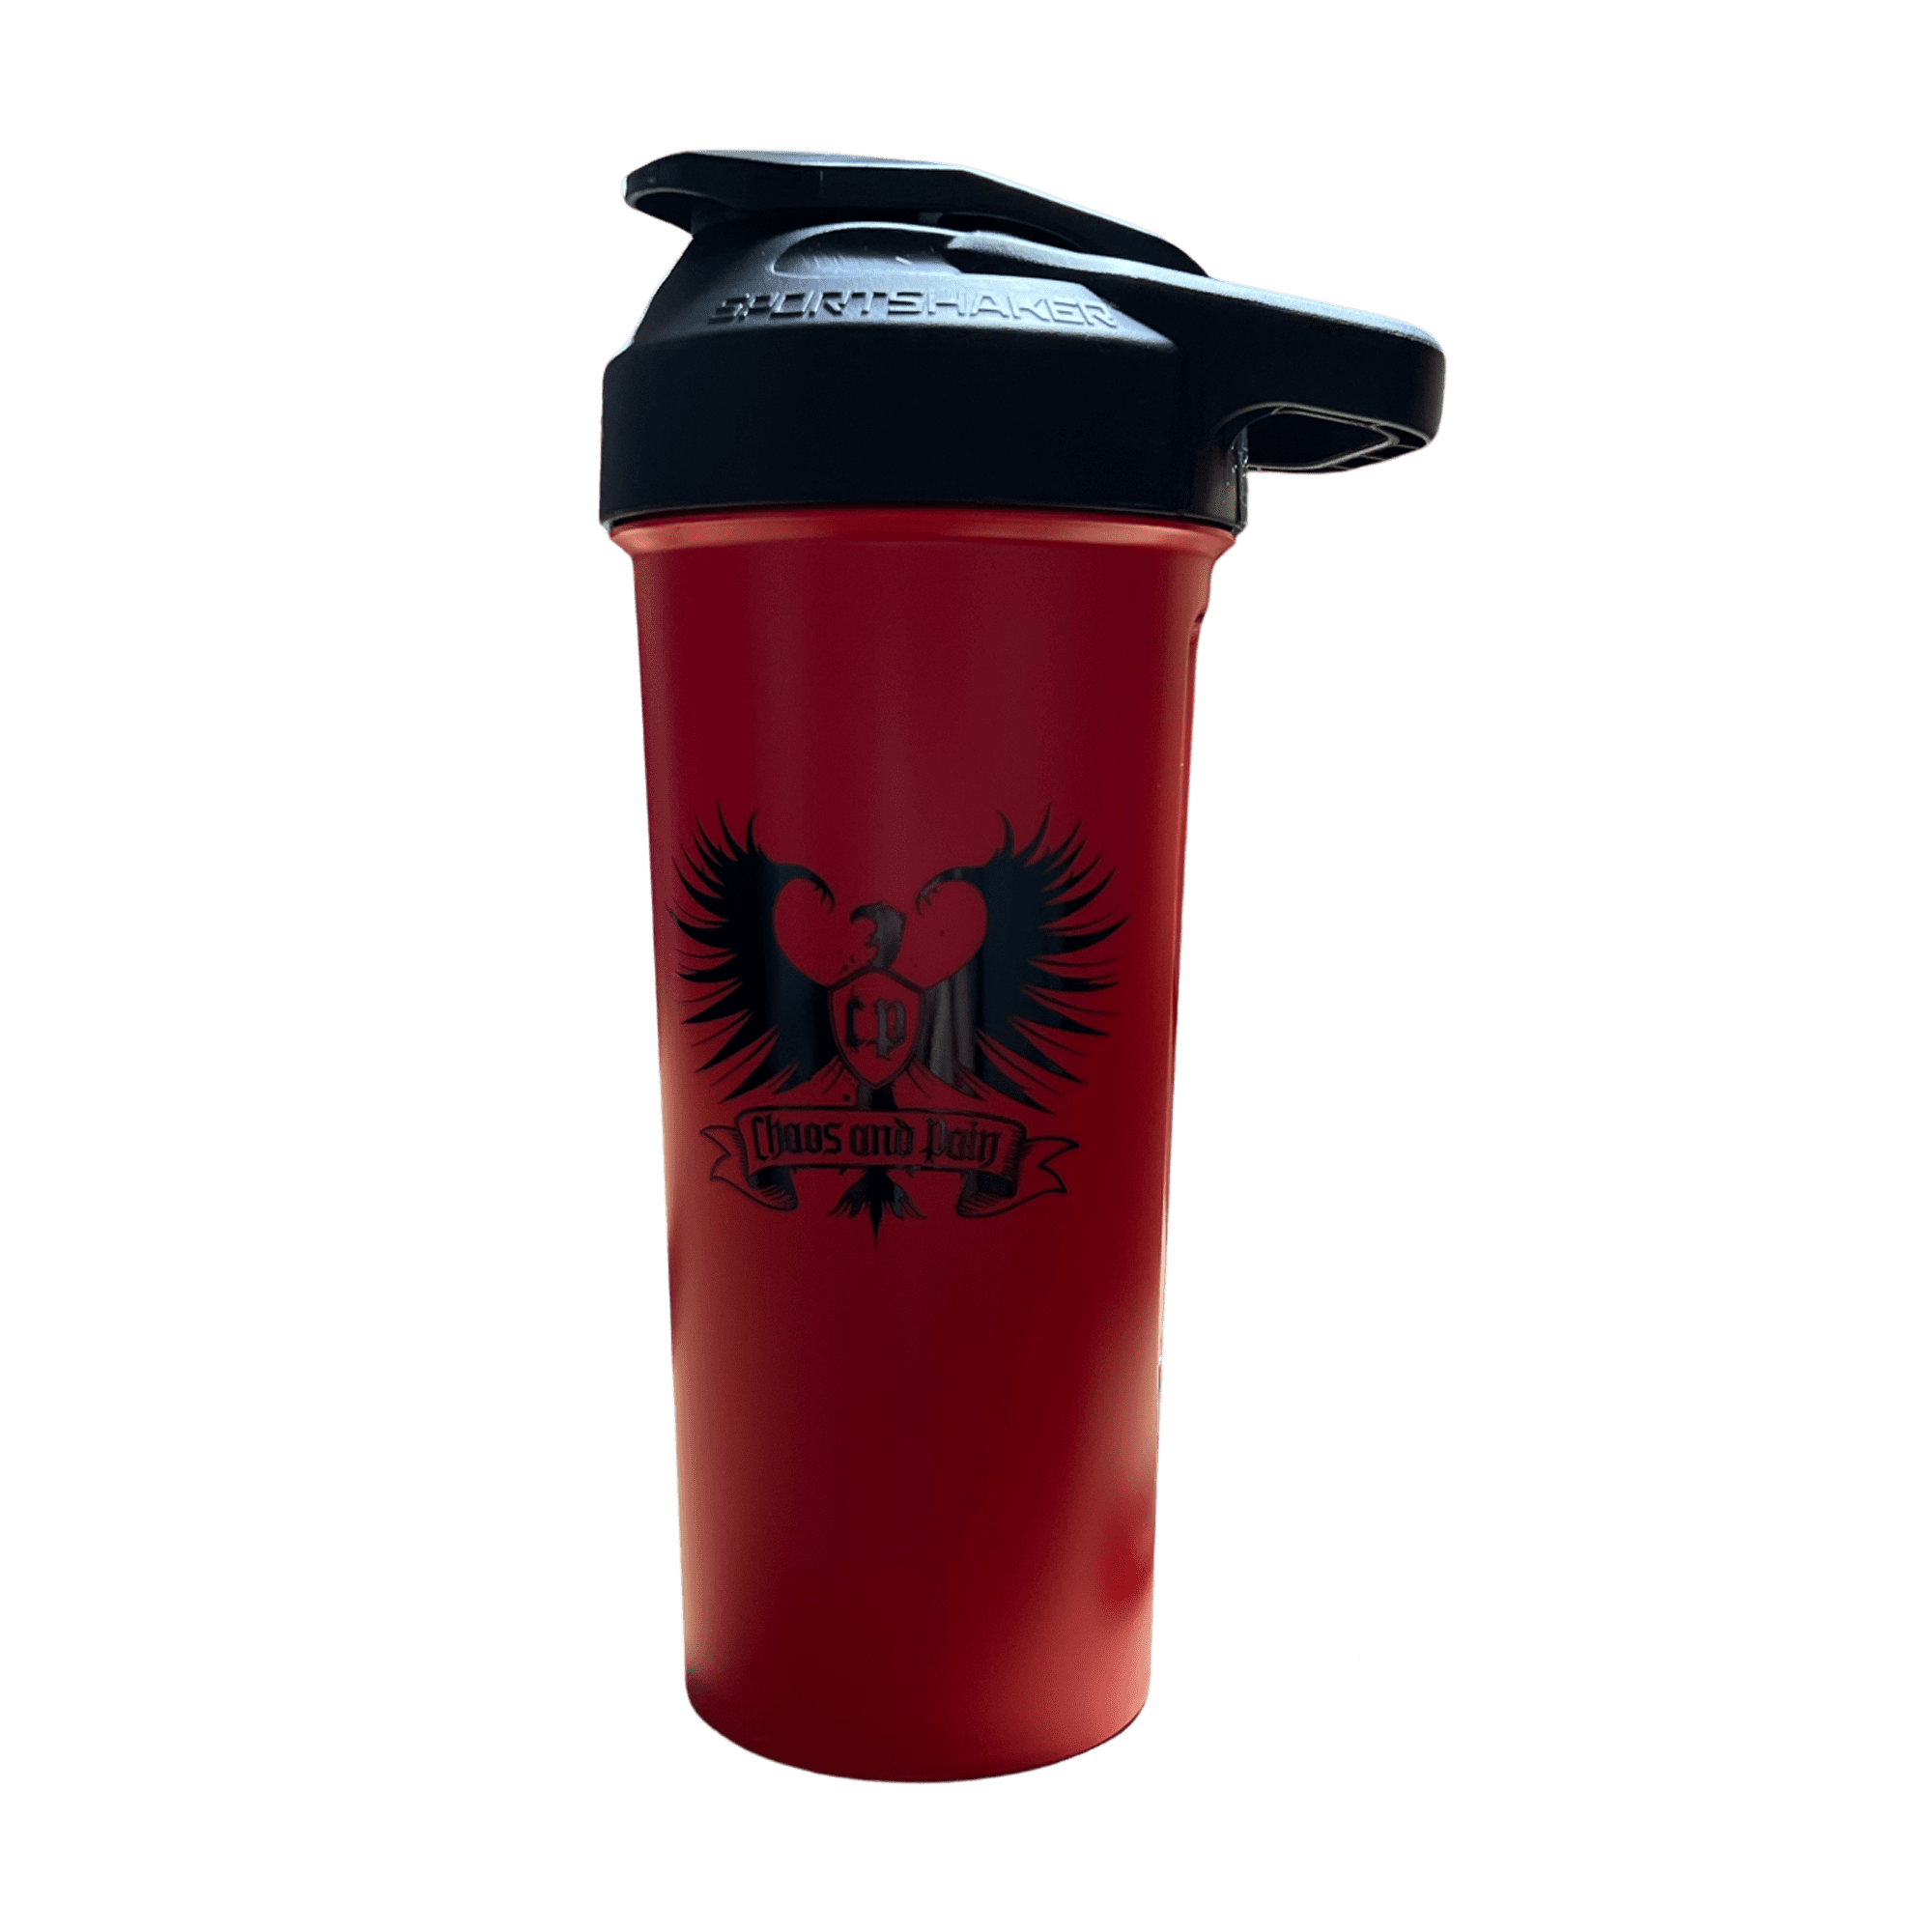 Chaos and Pain Limited Edition Red Shaker